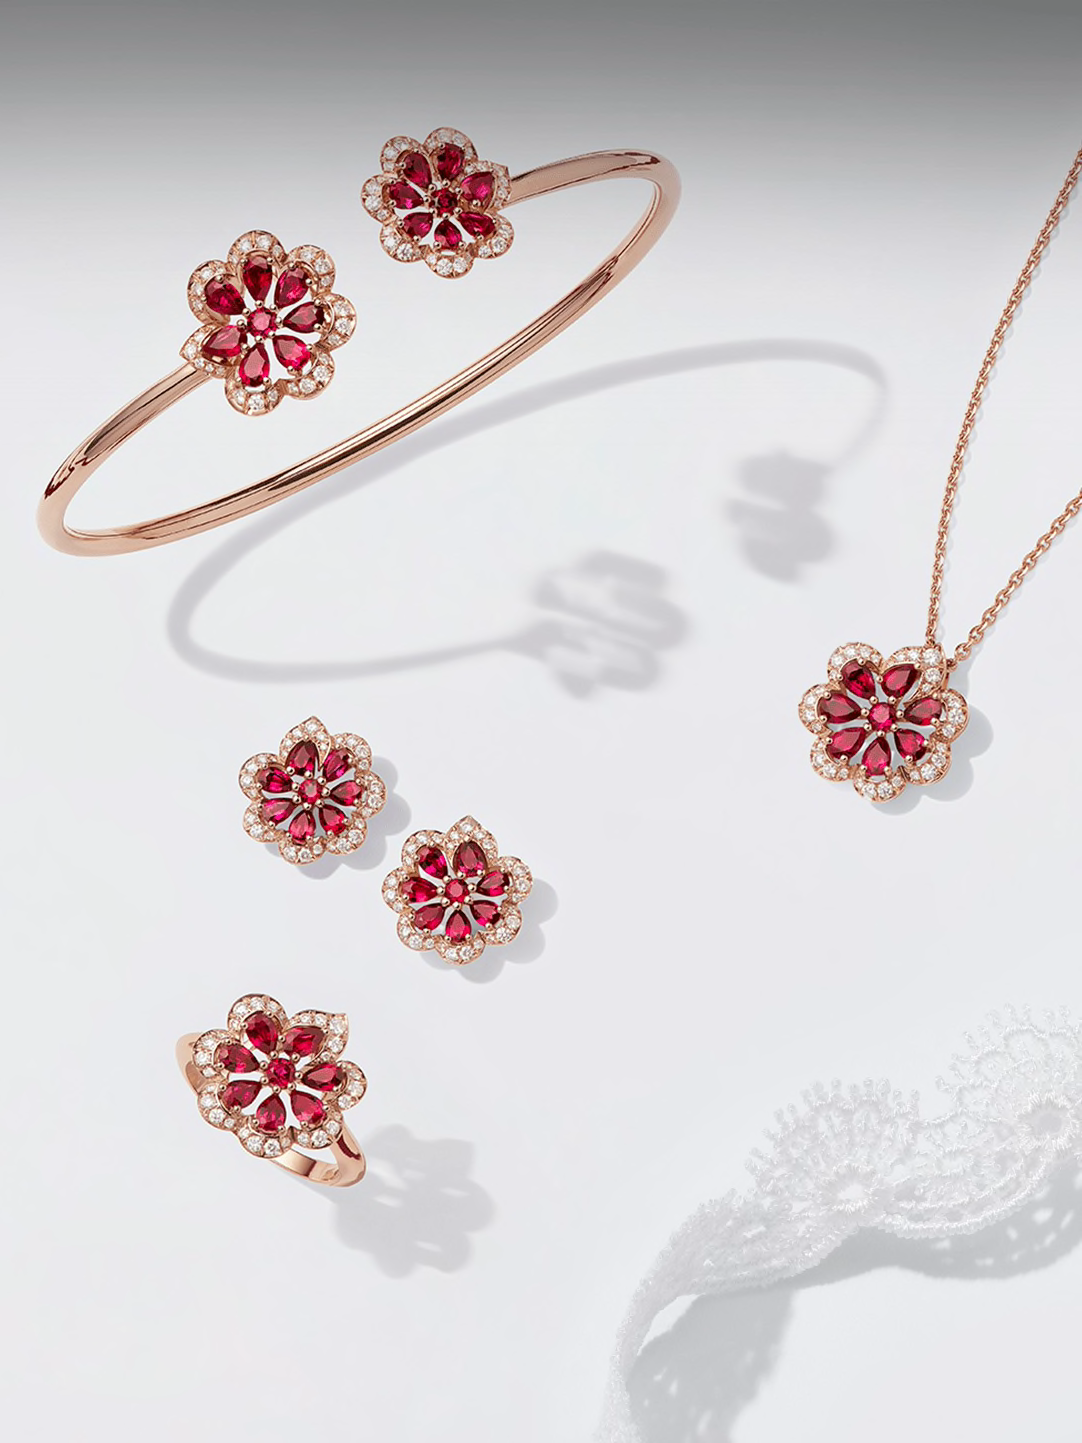 The Precious Lace High Jewelry collection by Chopard